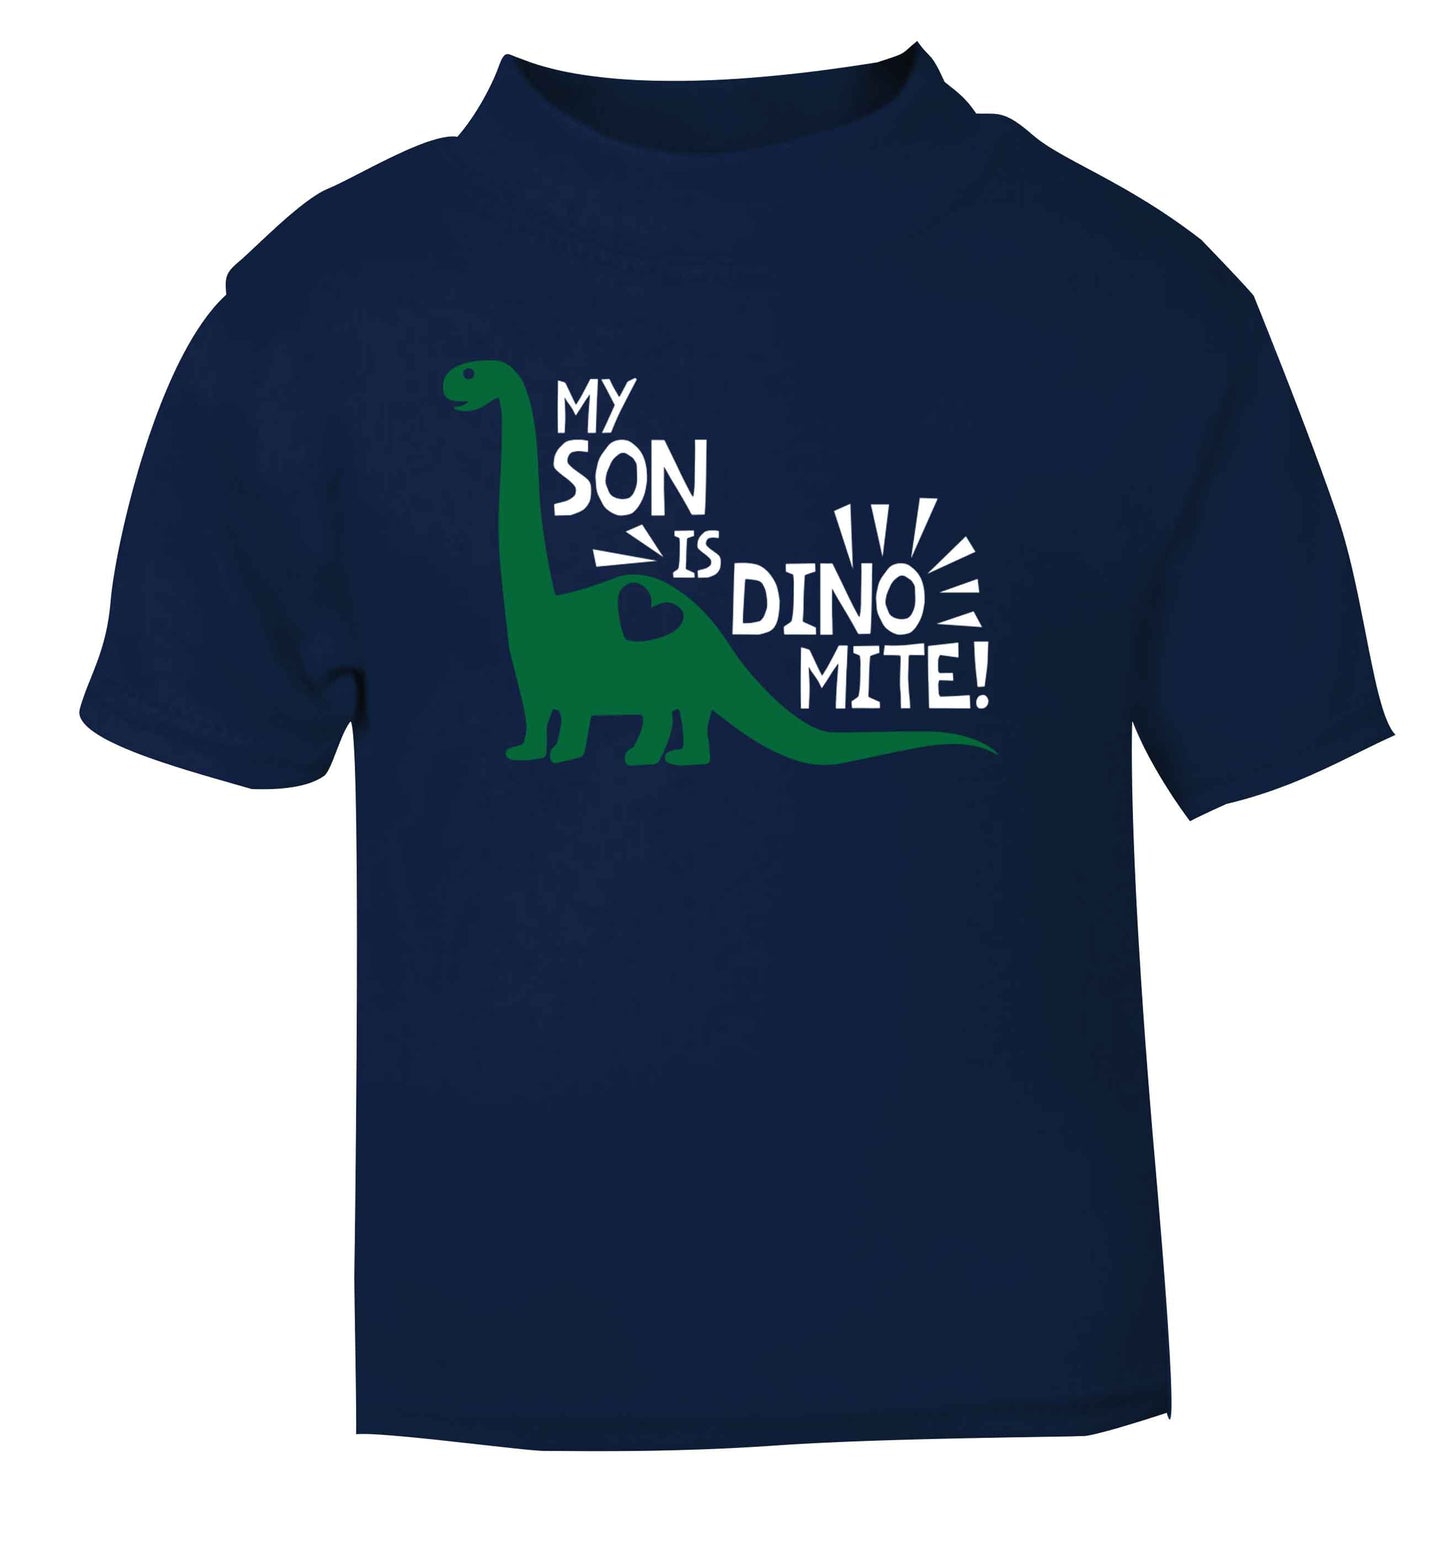 My son is dinomite! navy Baby Toddler Tshirt 2 Years